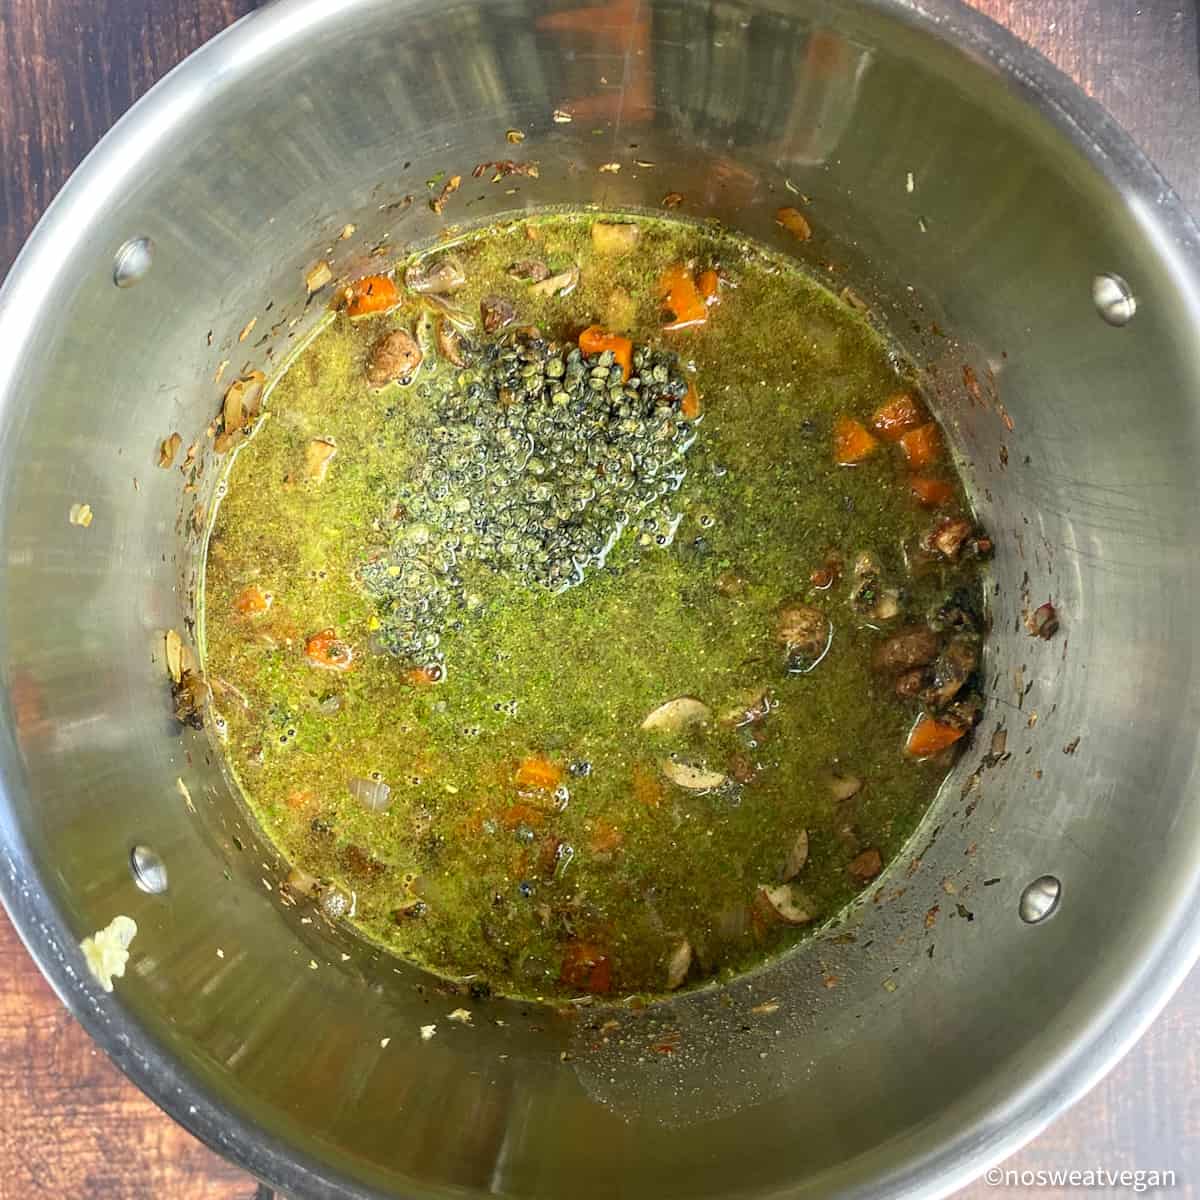 Lentils and vegetable broth added to the pot.